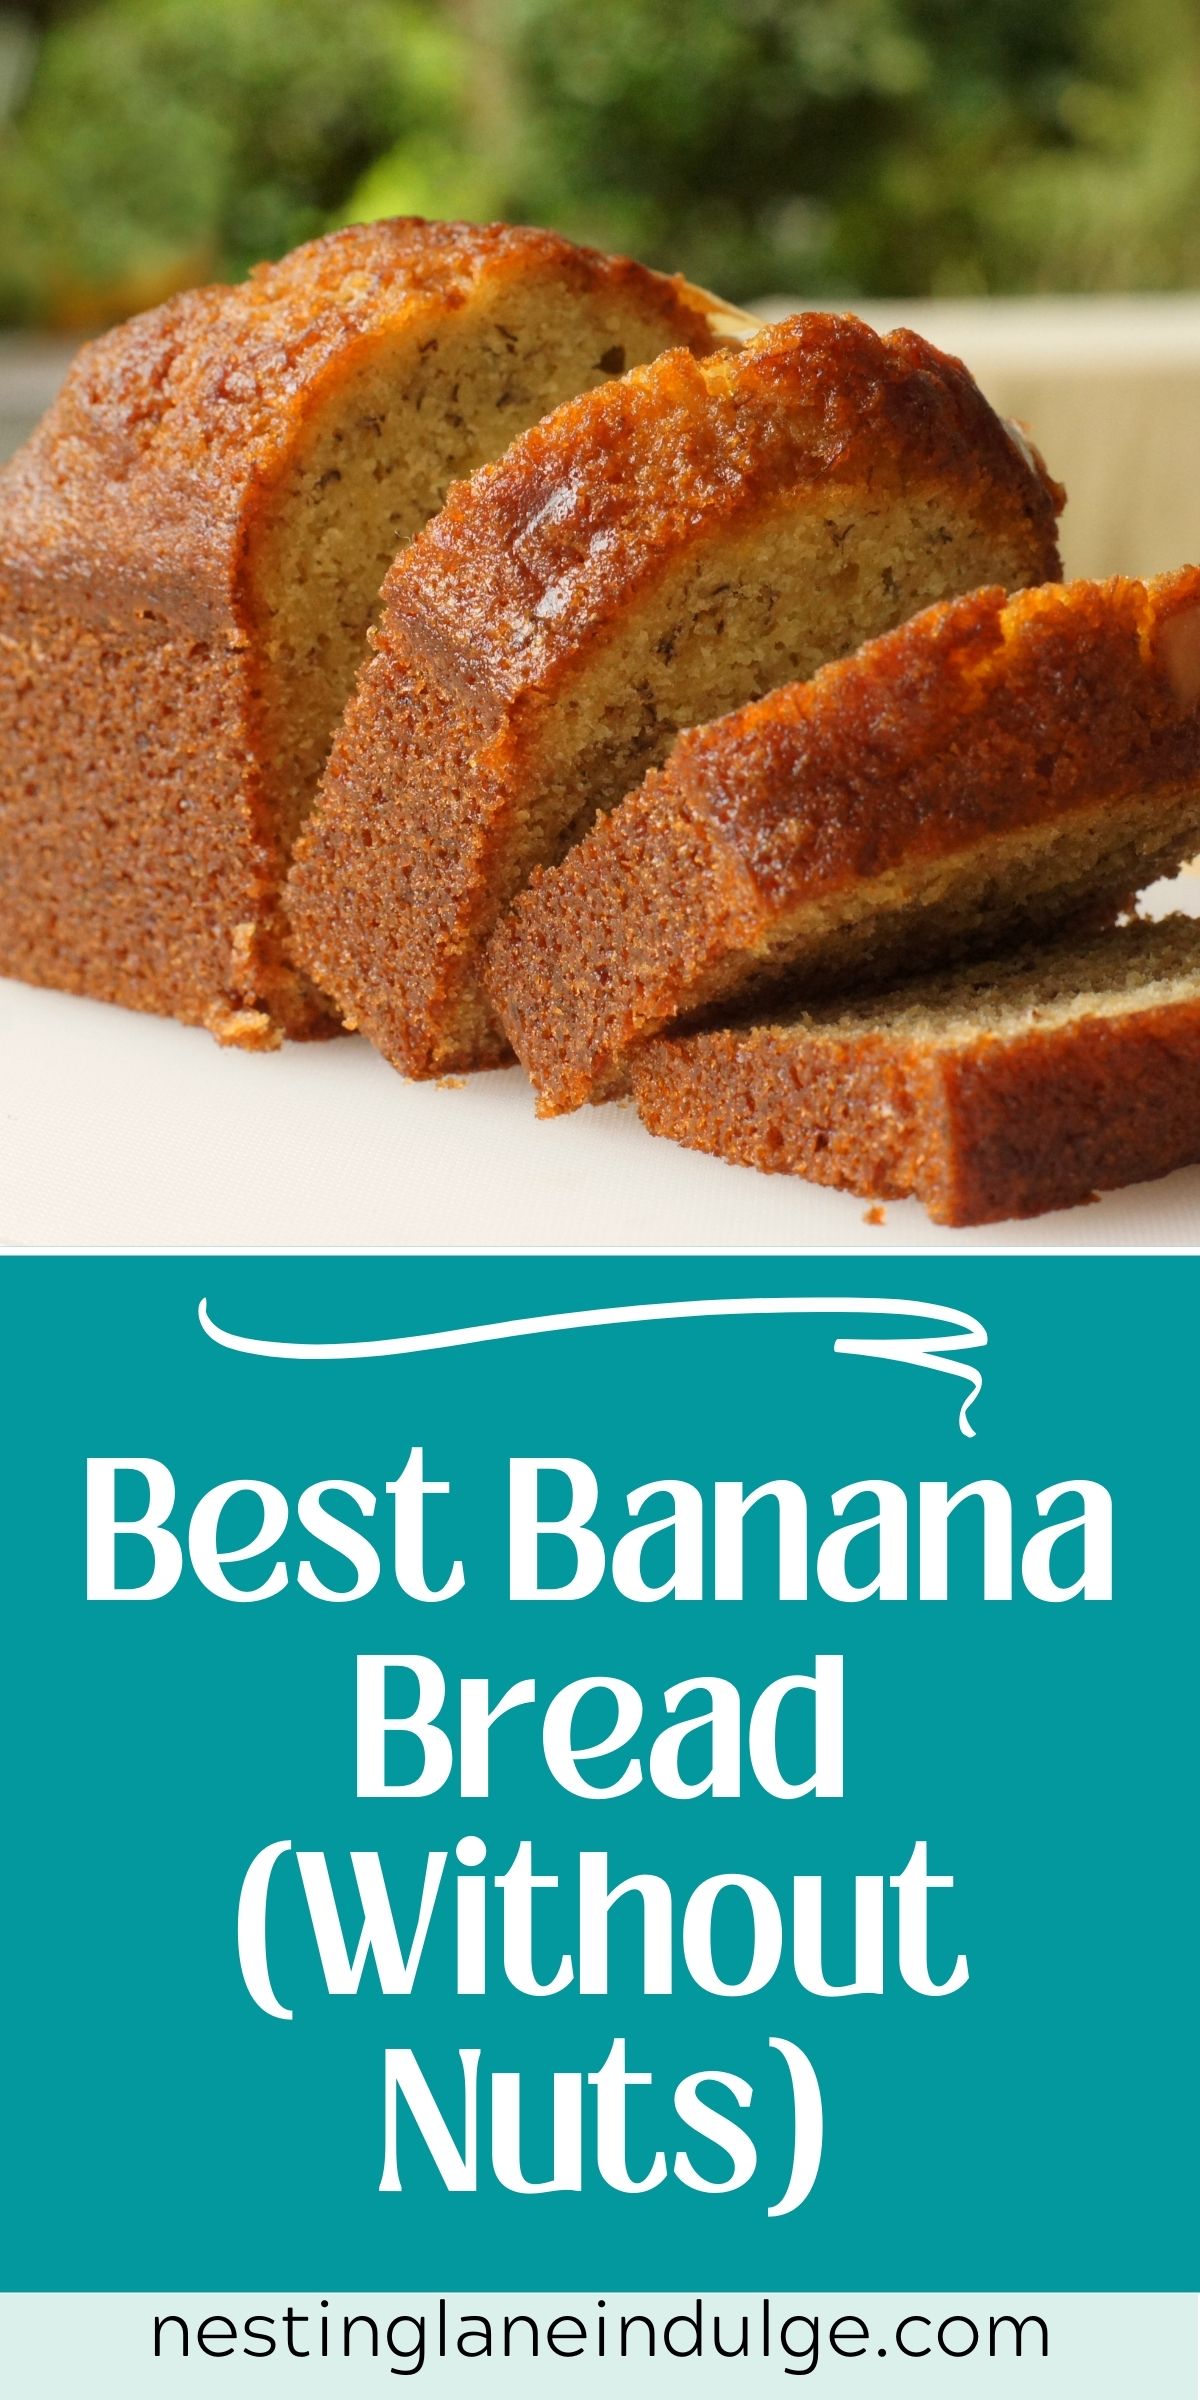 Graphic for Pinterest of Best Banana Bread (Without Nuts) Recipe.